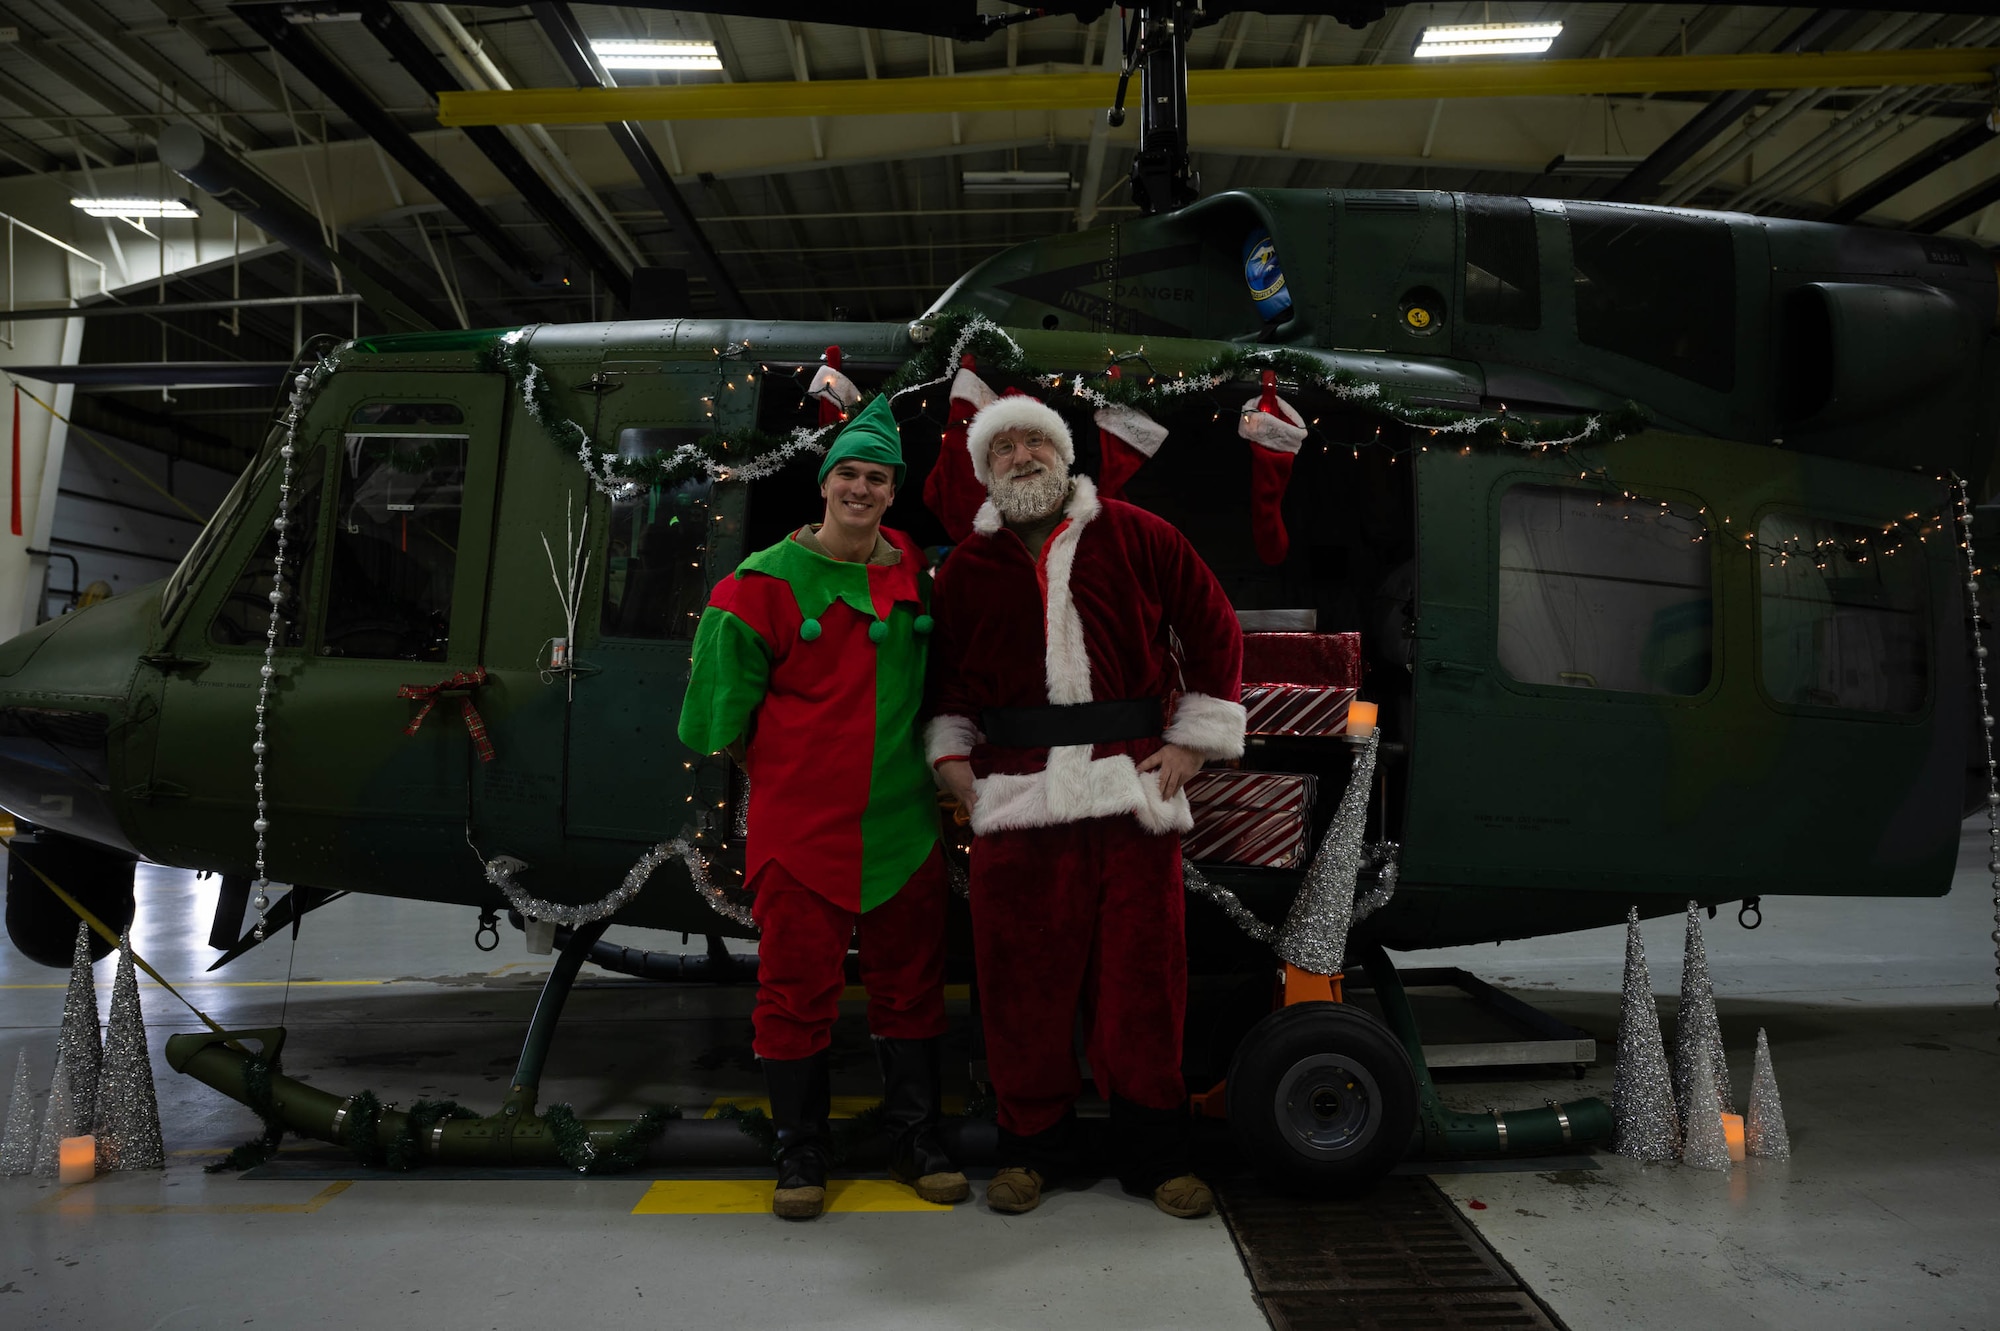 Santa Claus and an elf pose for a photo during the 54th Helicopter Squadron (HS) holiday party at Minot Air Force Base, North Dakota on December 10, 2023. At the HS holiday party, Claus takes the time to meet with children and pose for photos with members of Team Minot. (U.S. Air Force photo by A1C Luis Gomez)